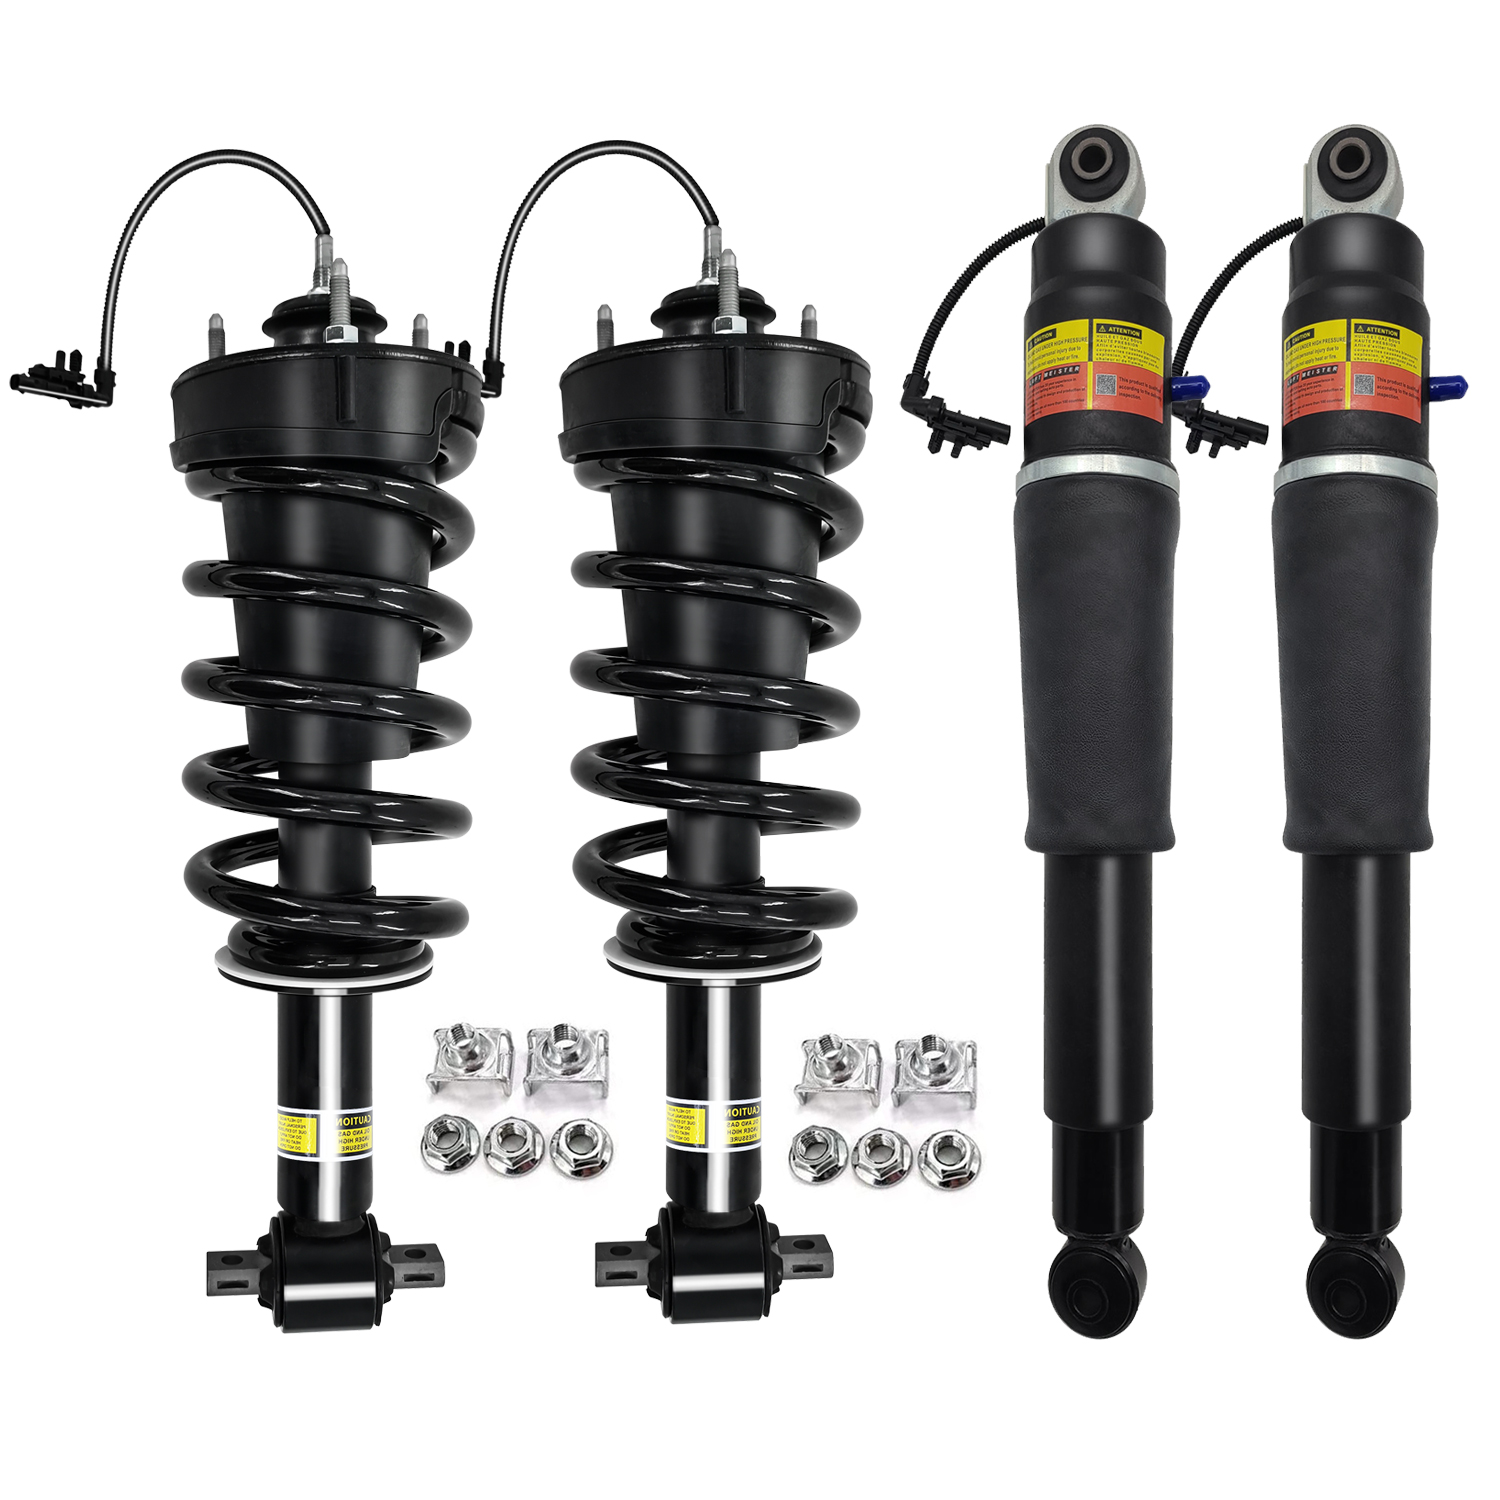 XL LUFT MEISTER 84176631 580-1108 1 PC Front Strut Shock Absorber w/Magnetic Assembly with spring for 2015-2021 Cadillac Escalade Tahoe Suburban Silverado GMC Sierra 1500 Yukon 